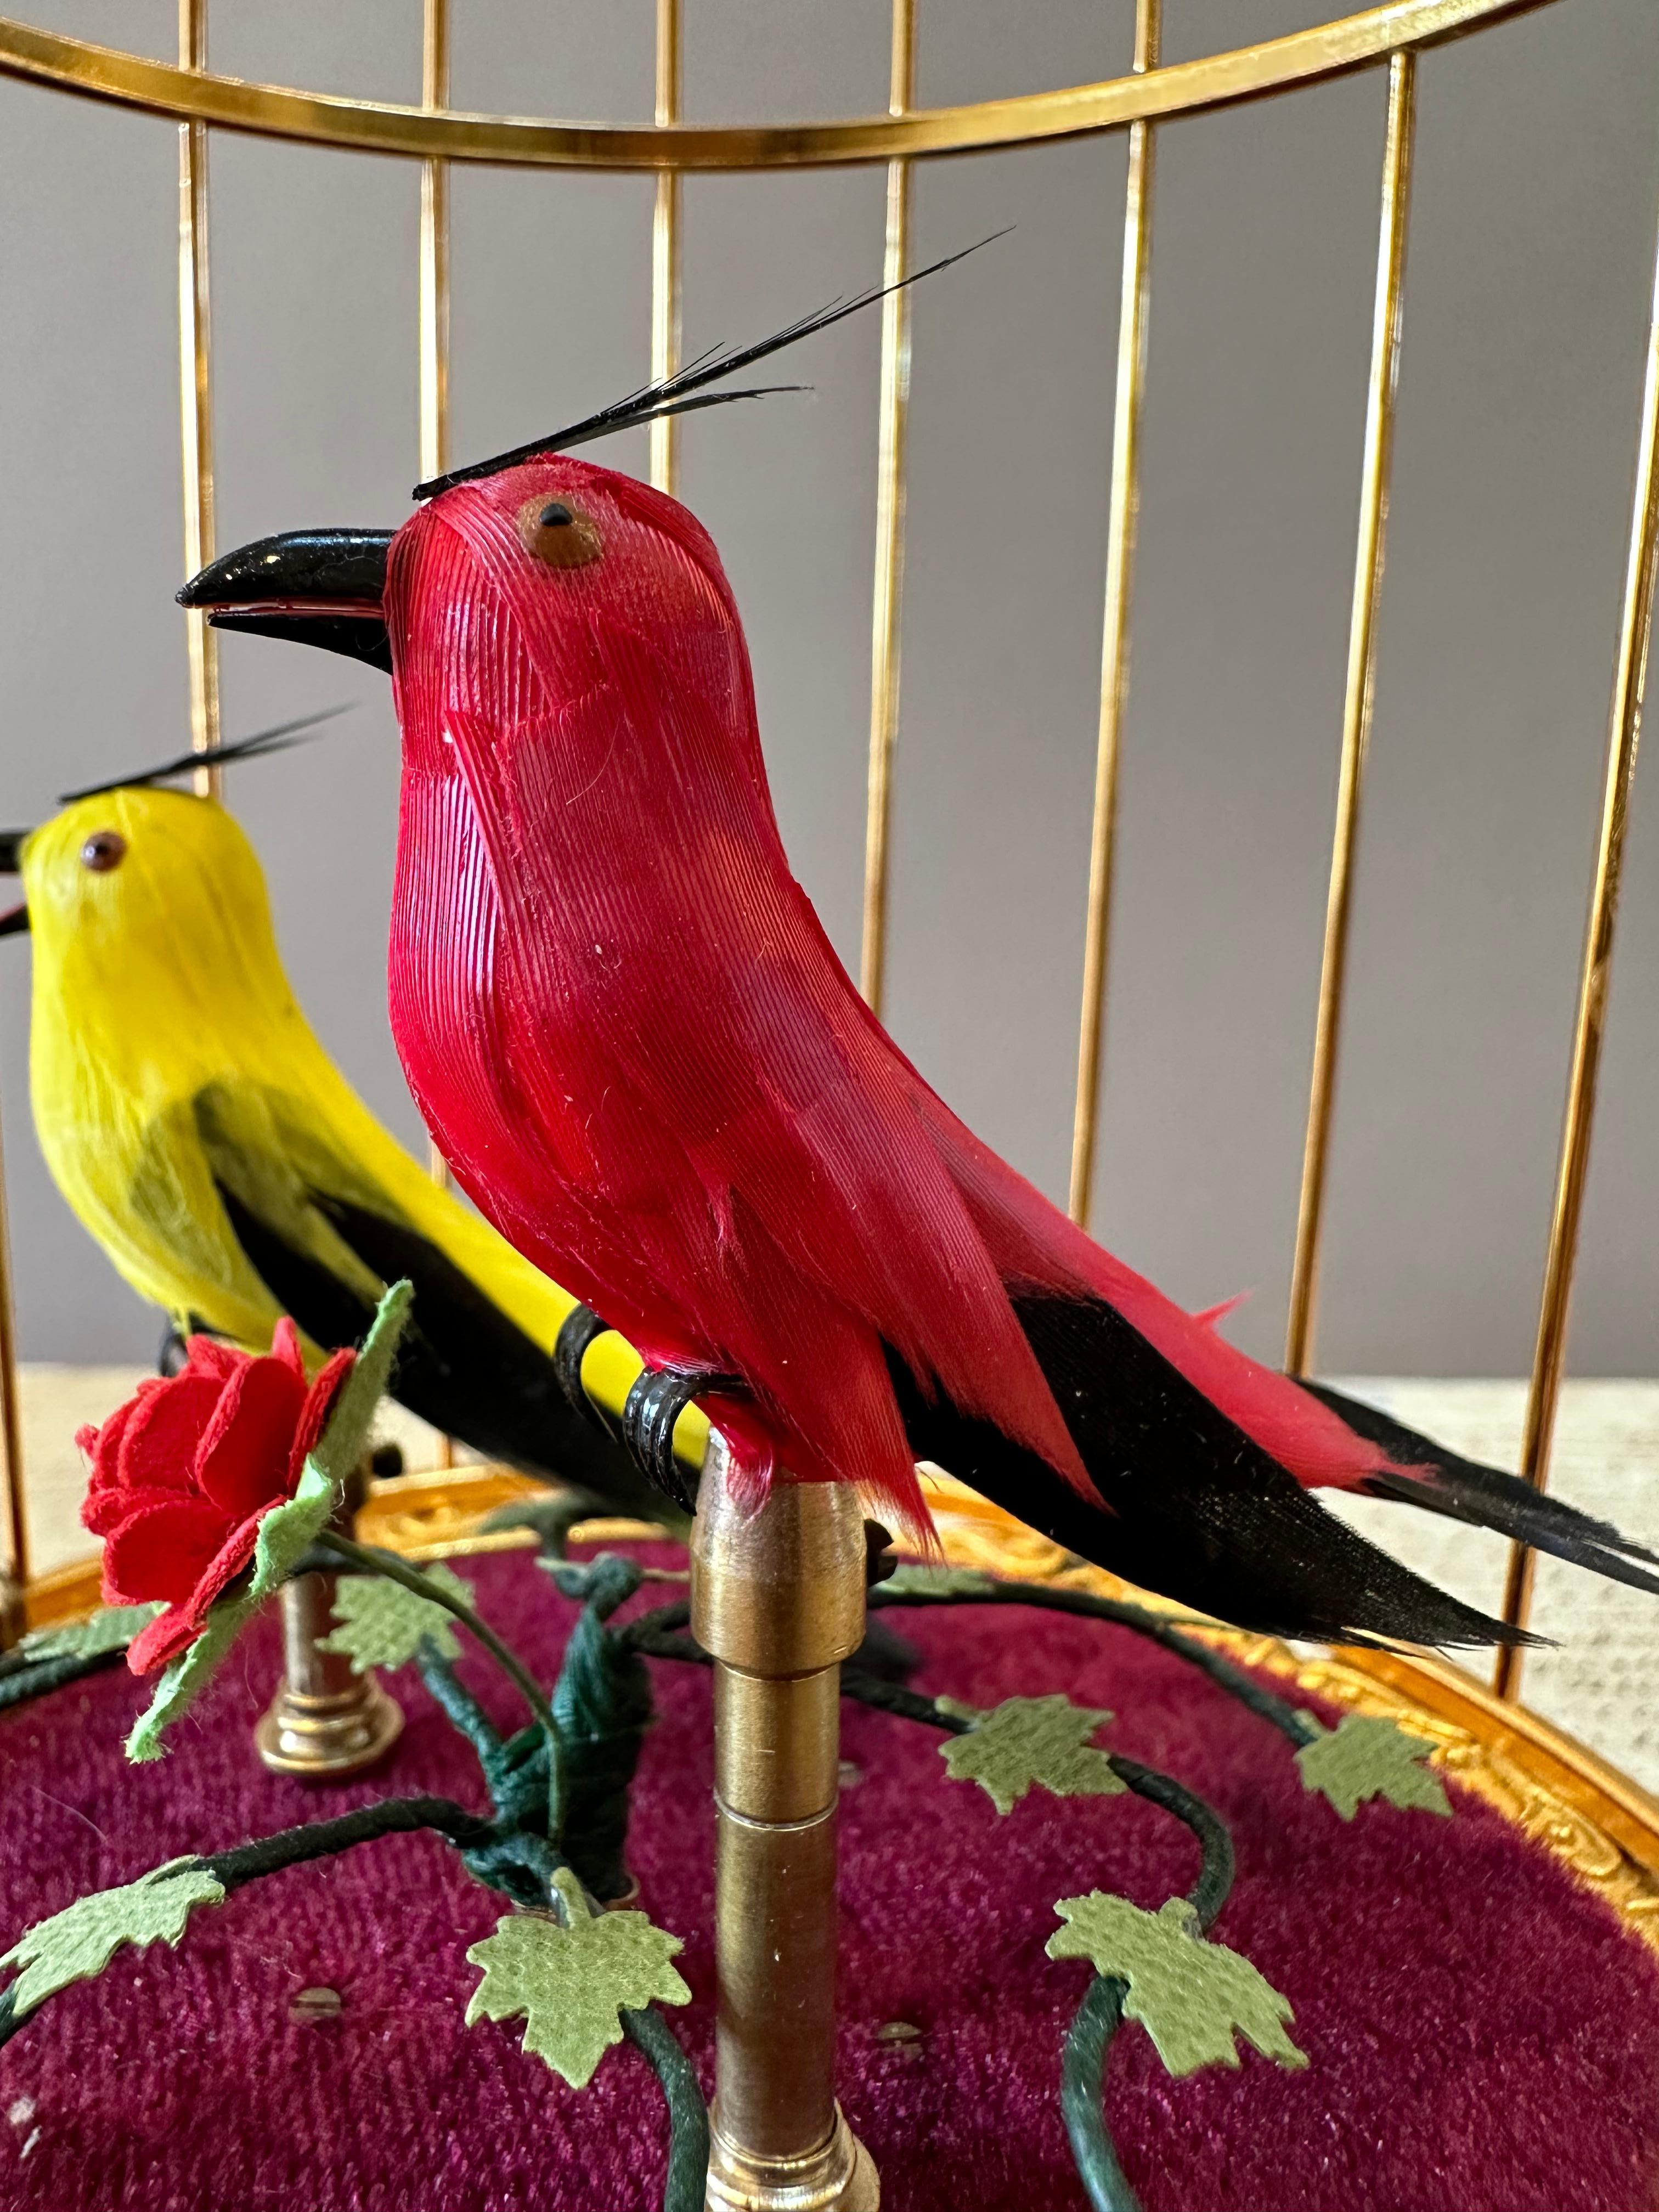 Early 20th Century Musical Birds Automaton. Two automated singing birds with strong voices amidst foliage in a “baroque” style gilded brass cage. The Birds take turns singing to each other. Made in Germany, circa 1920.     